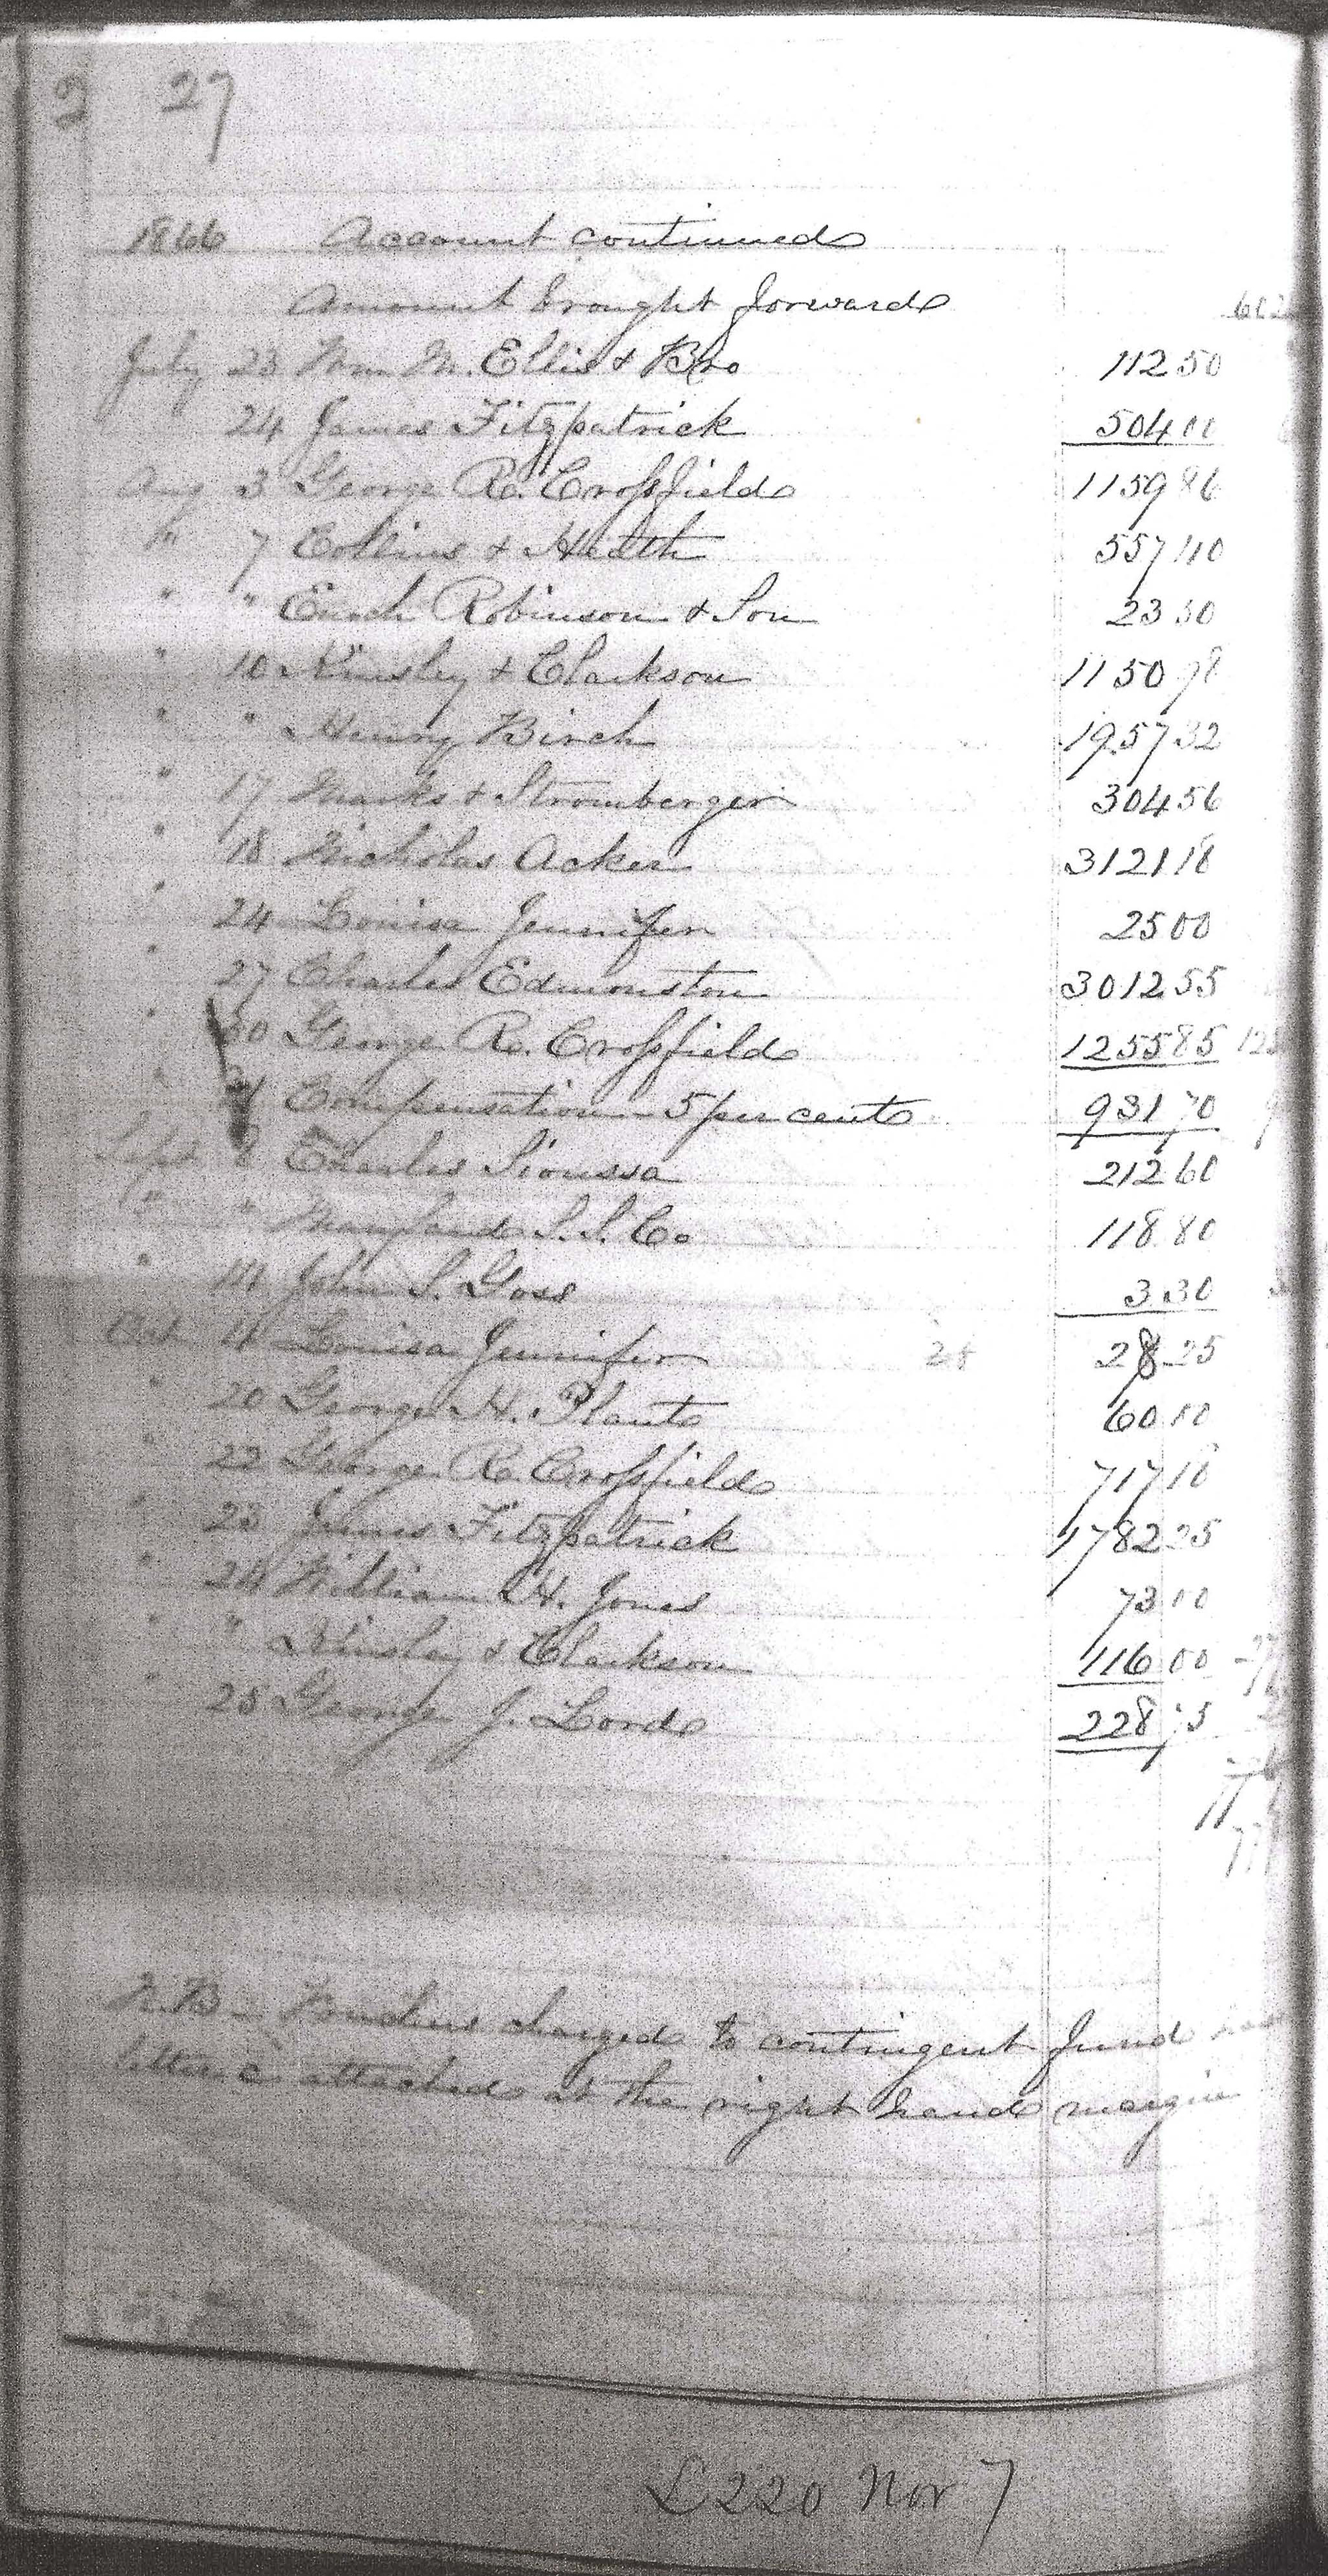 Monthly Report of the Superintendent of Construction, November 1, 1866, Page 4 of 4